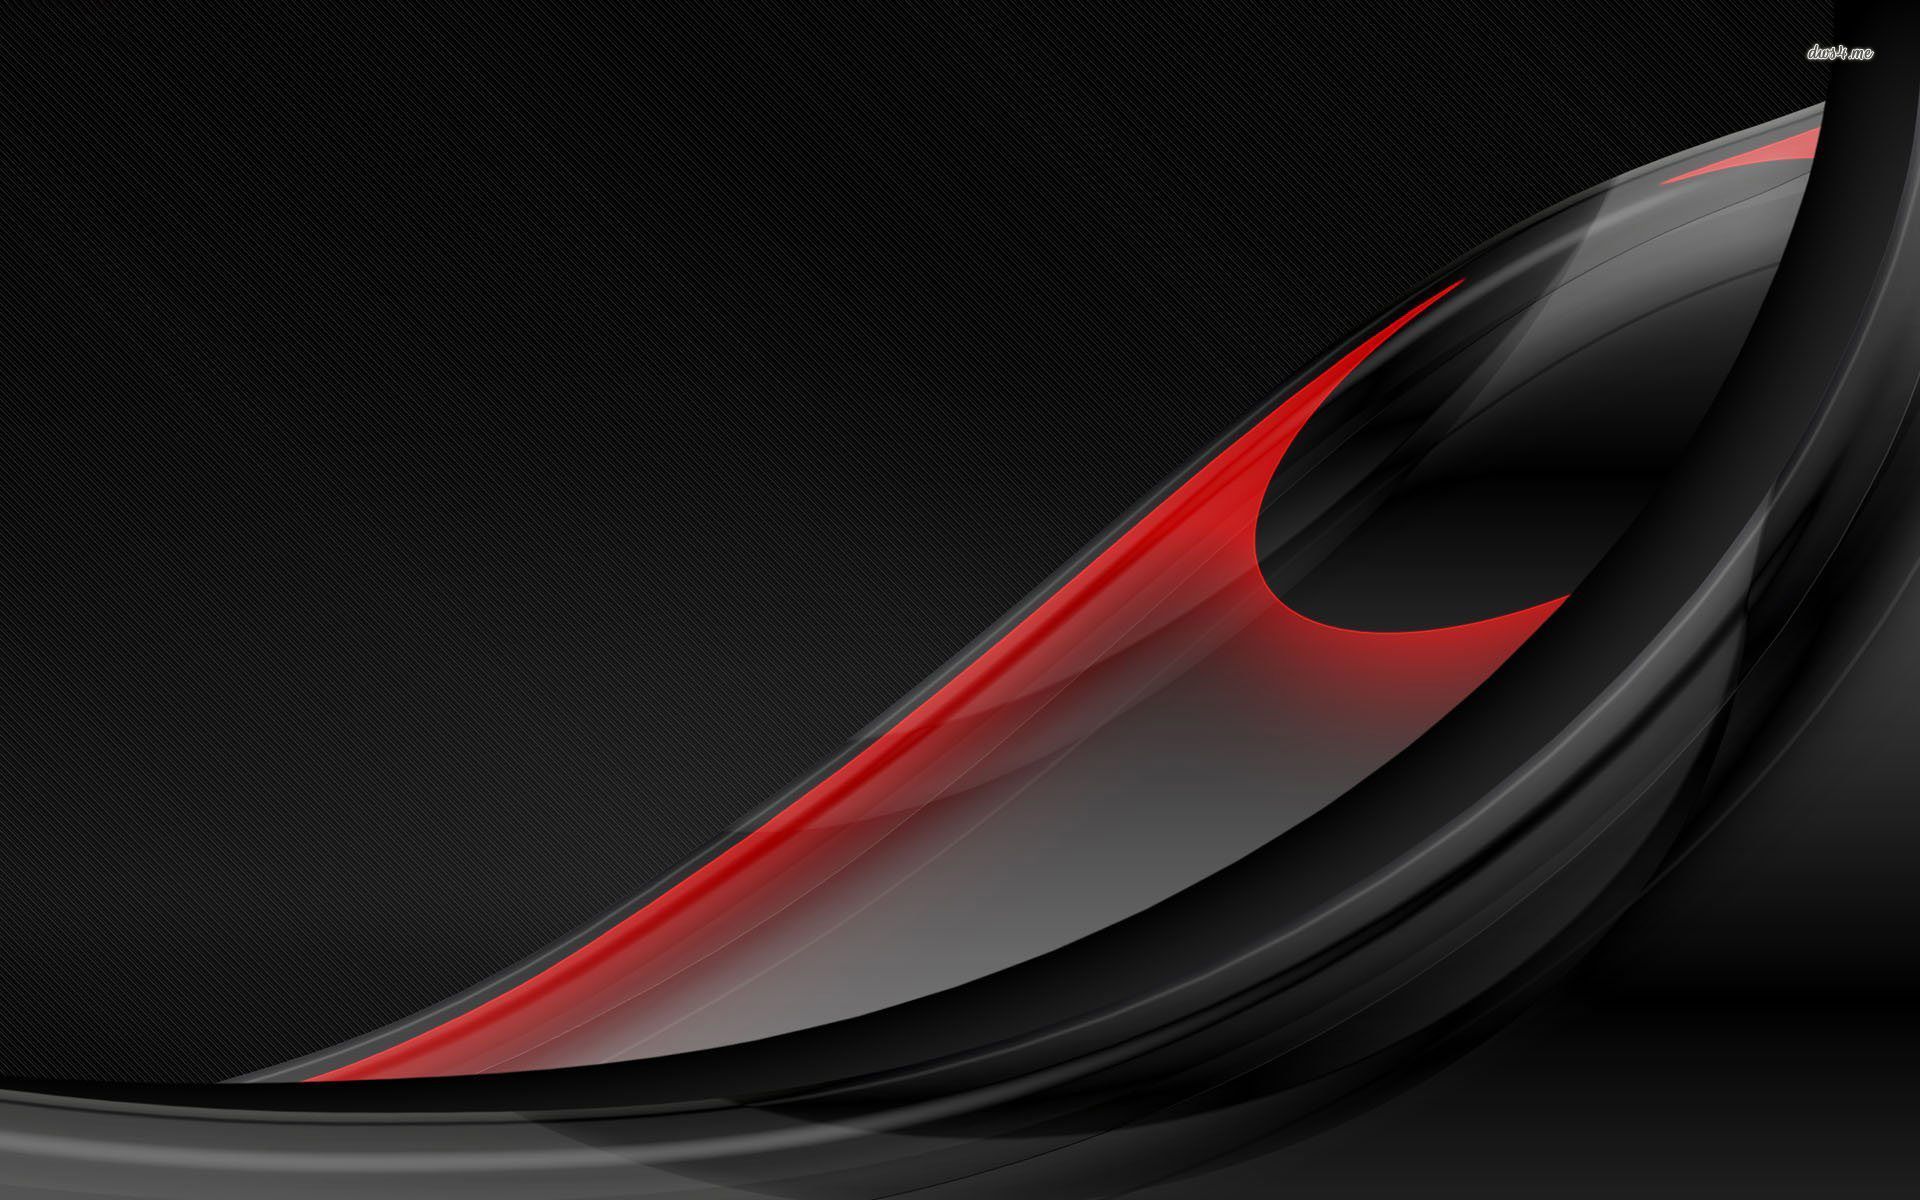 black and red feather abstract desktop wallpaper download black and